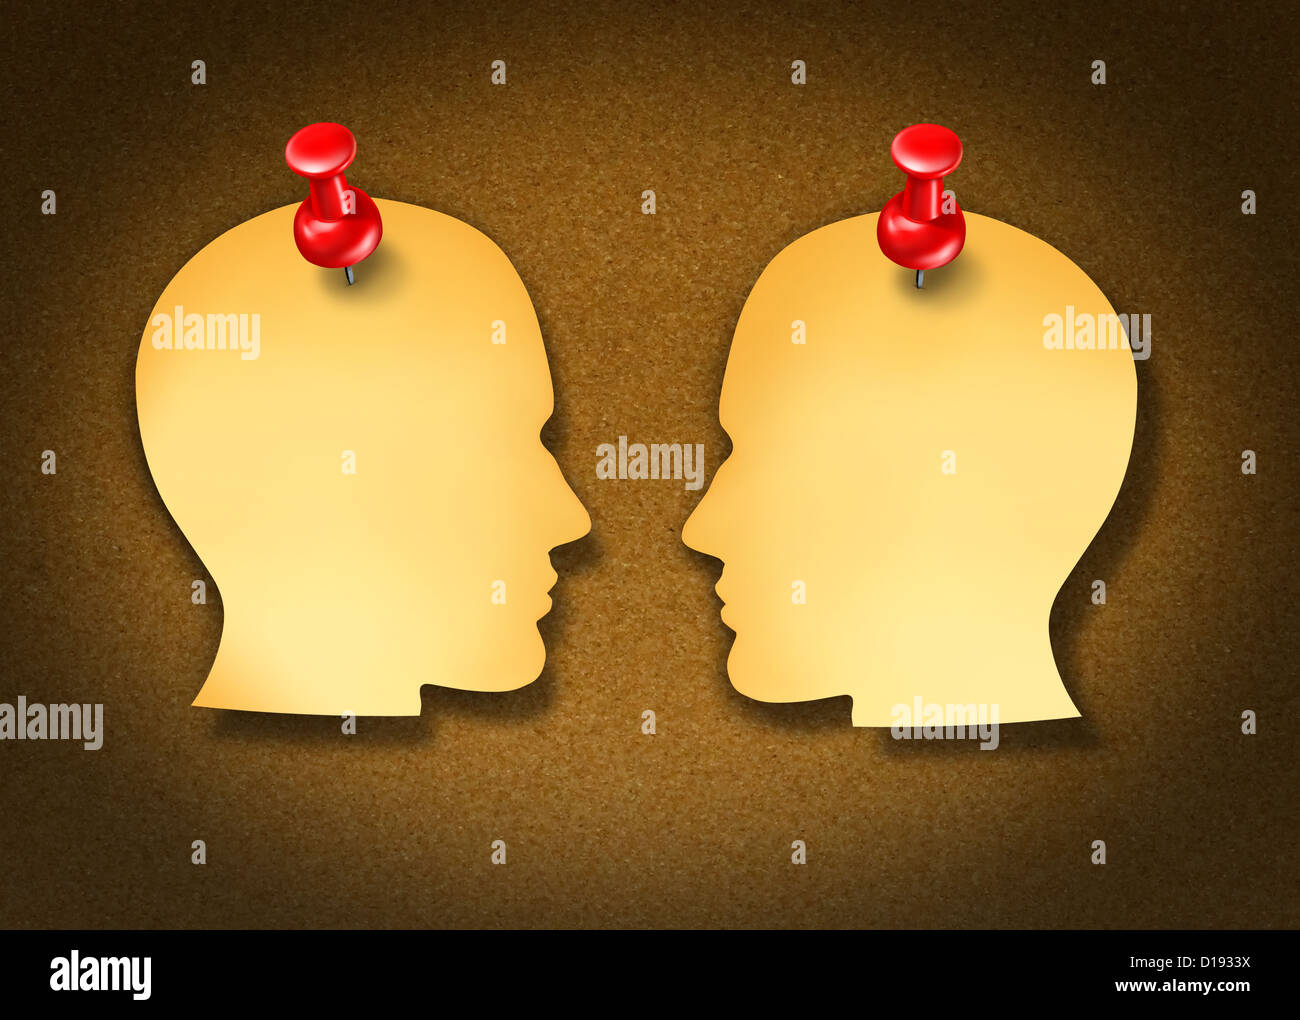 Communication Network strategy with two blank yellow office notes and red thumb tacks in the shape of human heads face to face in a social exchange of information on white. Stock Photo